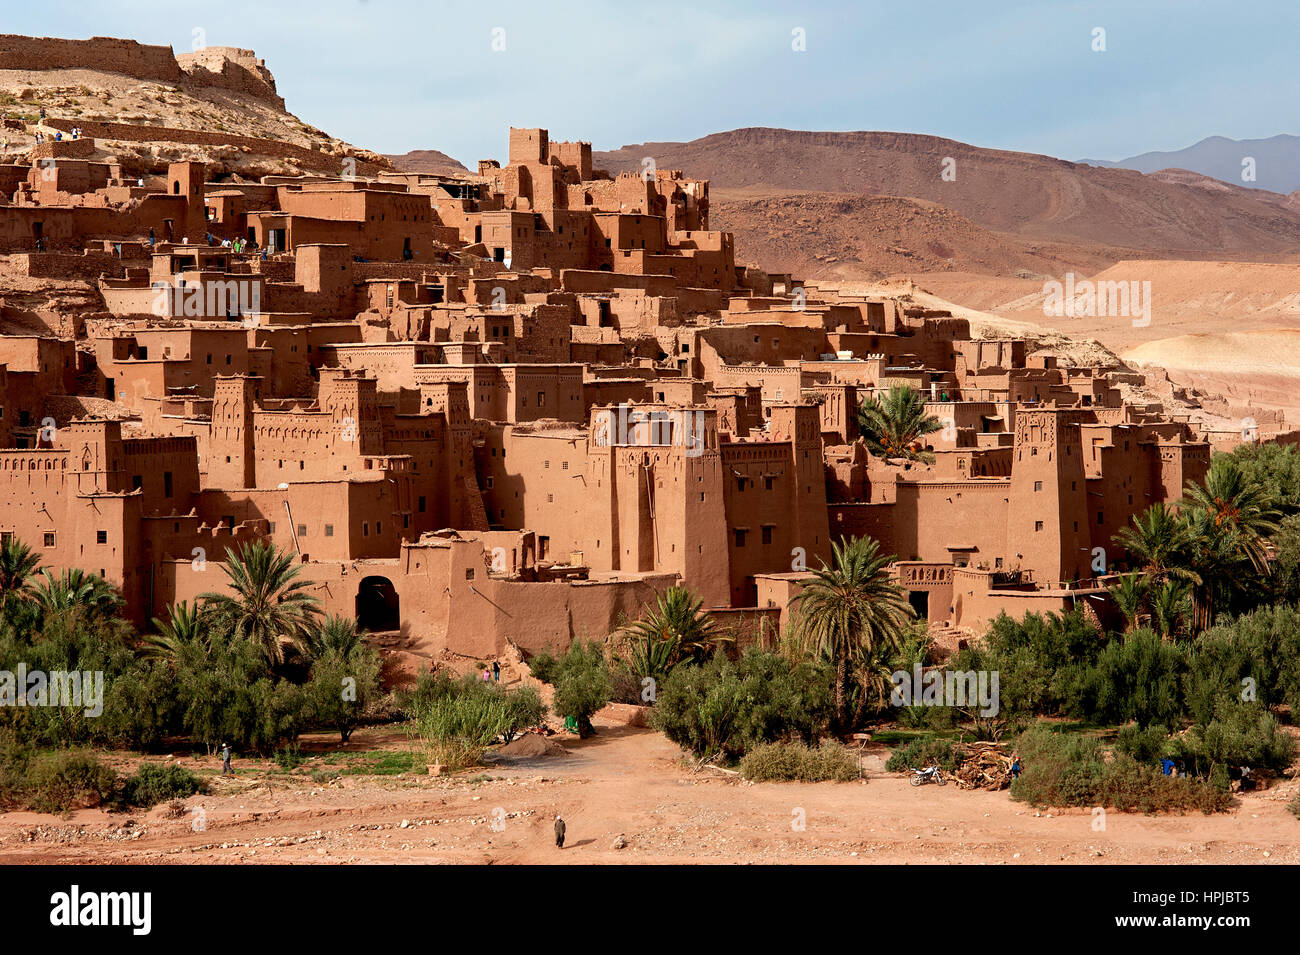 The fortified Moroccan town of Ait Benhaddou with its kasbahs and earth-clay buildings is a UNESCO world heritage site and has featured in many films. Stock Photo